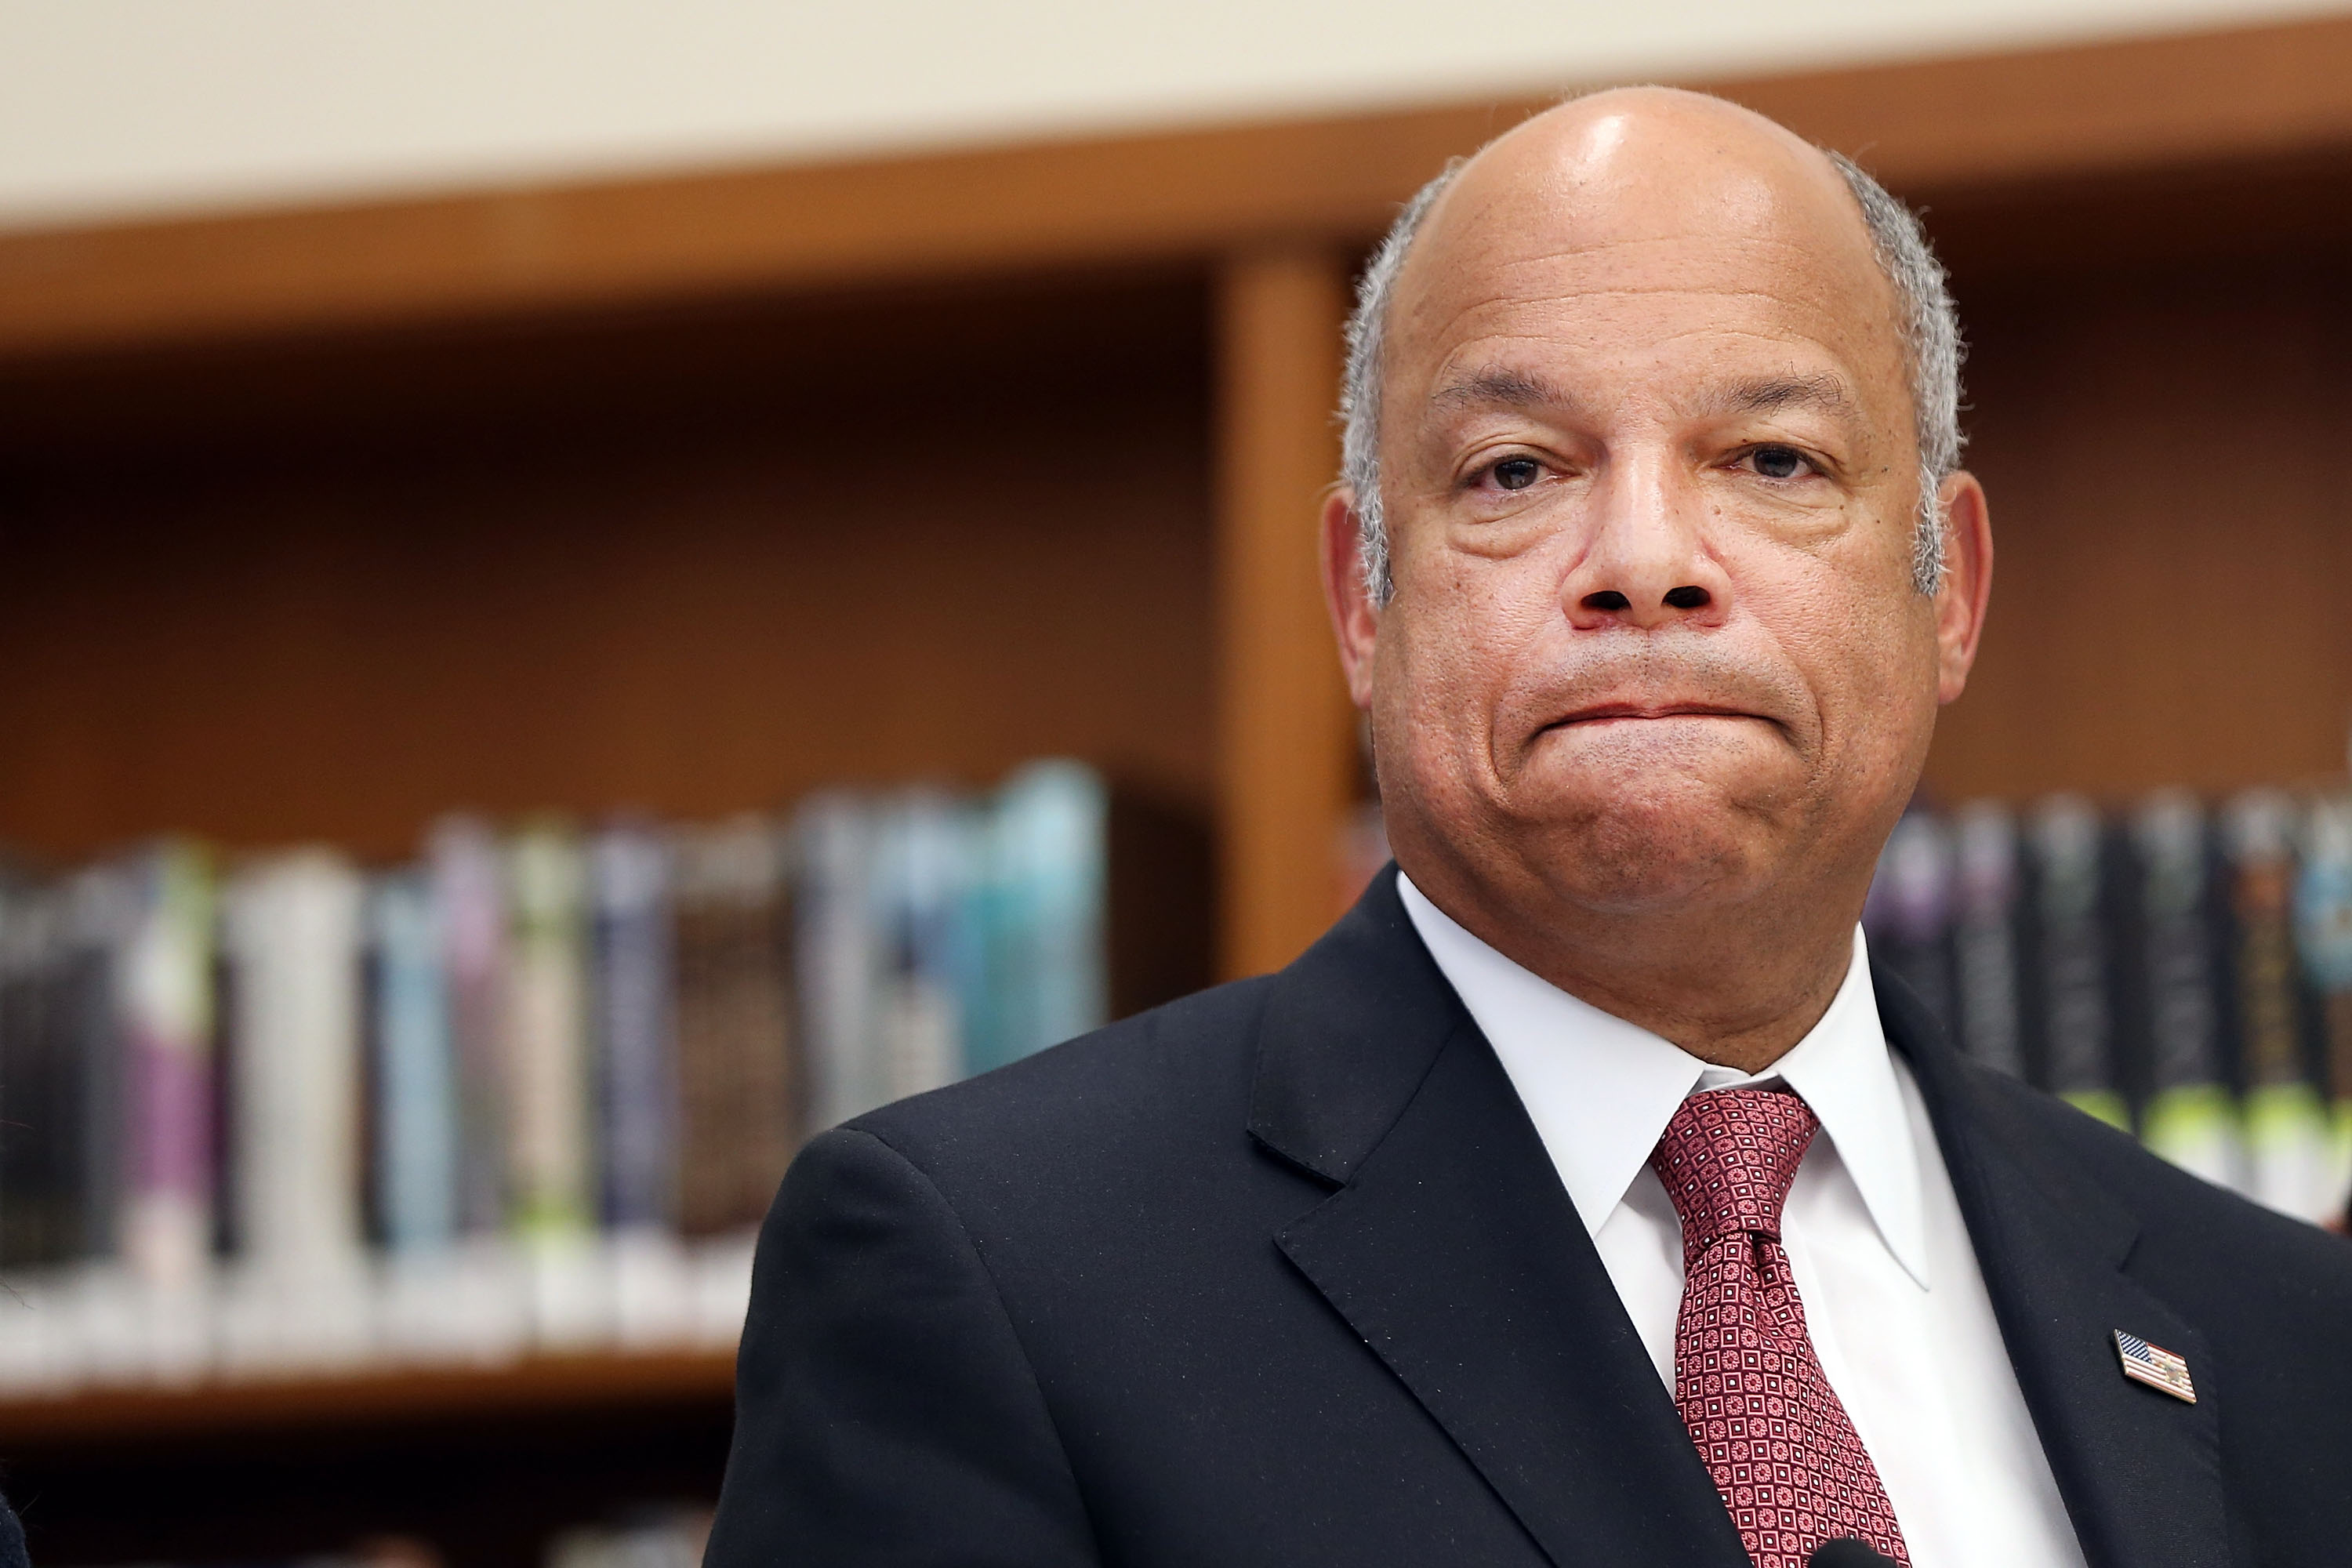 DHS Secretary Jeh Johnson replaced the head of the TSA after a bad airport security report